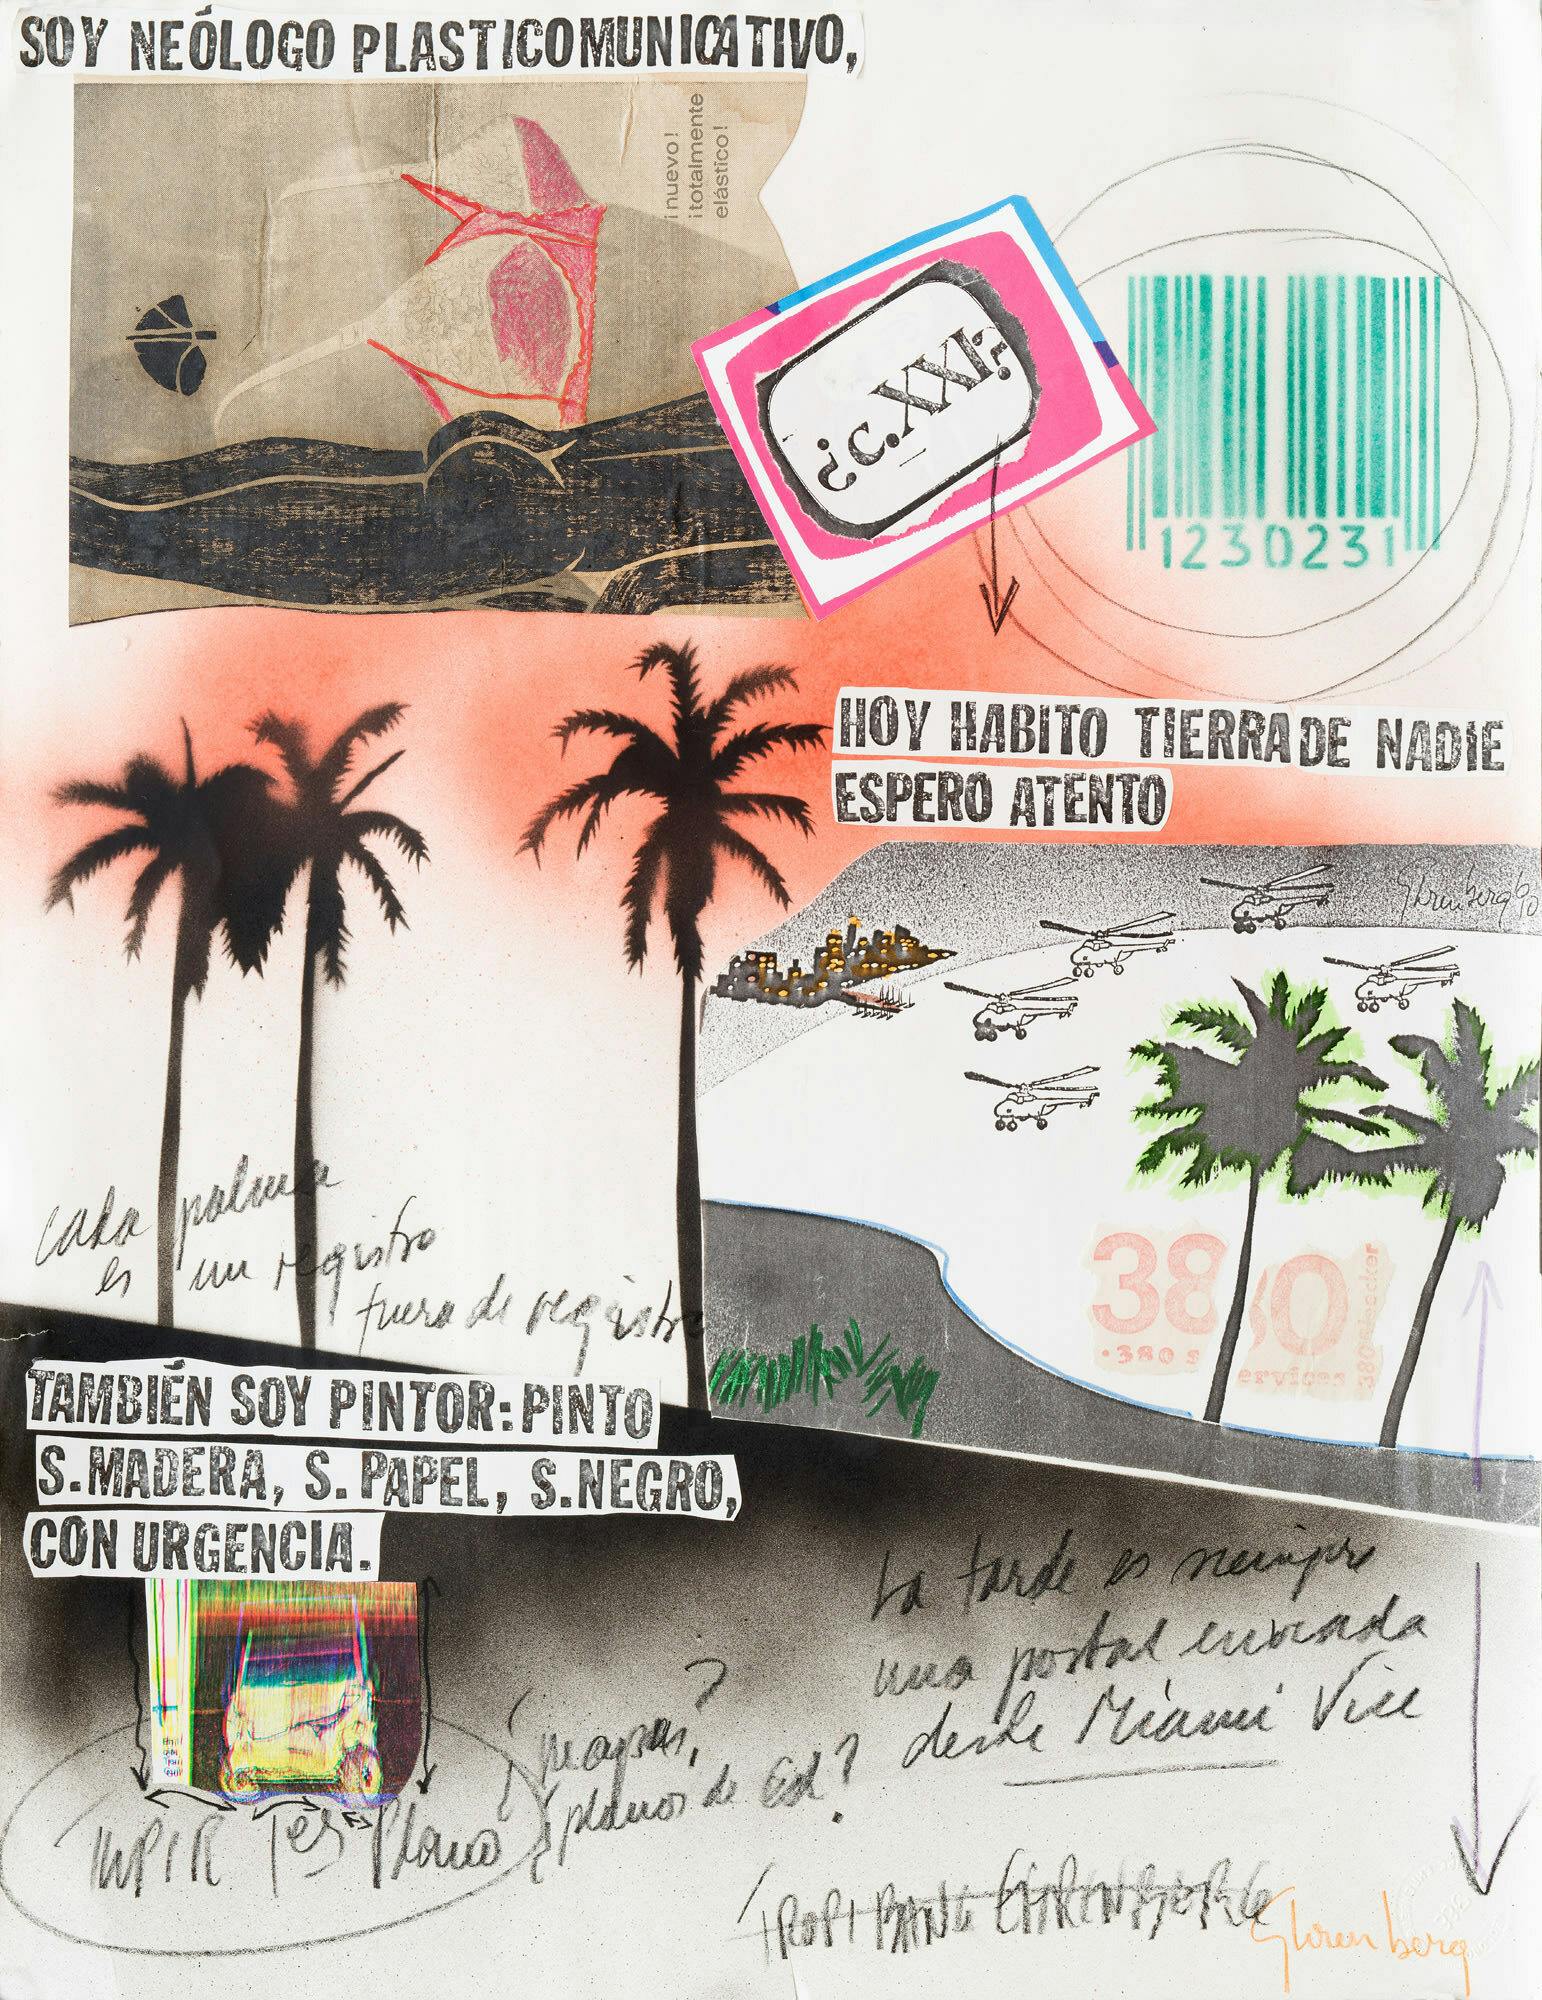 A collage showing various newspaper clippings of text overlaid with handwritten text and stamps.